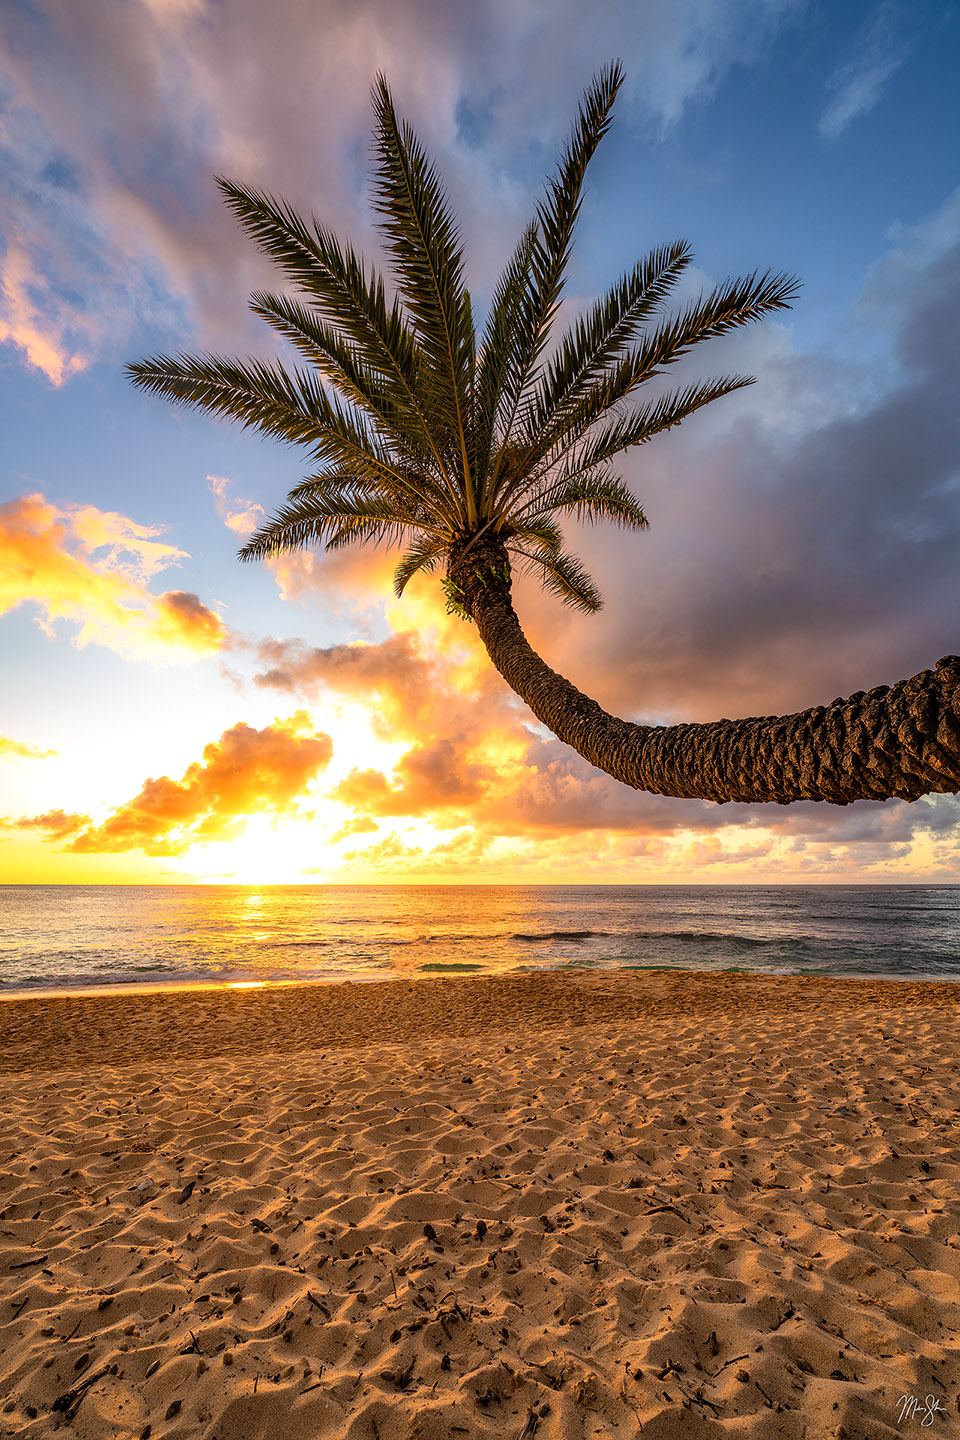 A beautiful sunset casts a warm glow over the North Shore of Oahu. I found this curved palm tree at Sunset Beach Park and thought it made for an awesome scene, as the palm tree almost seemed to be stretching out to watch the sunset with me. The glow of the warm sunset casted a golden glow to the sands below as the clouds turned from yellow to orange above.